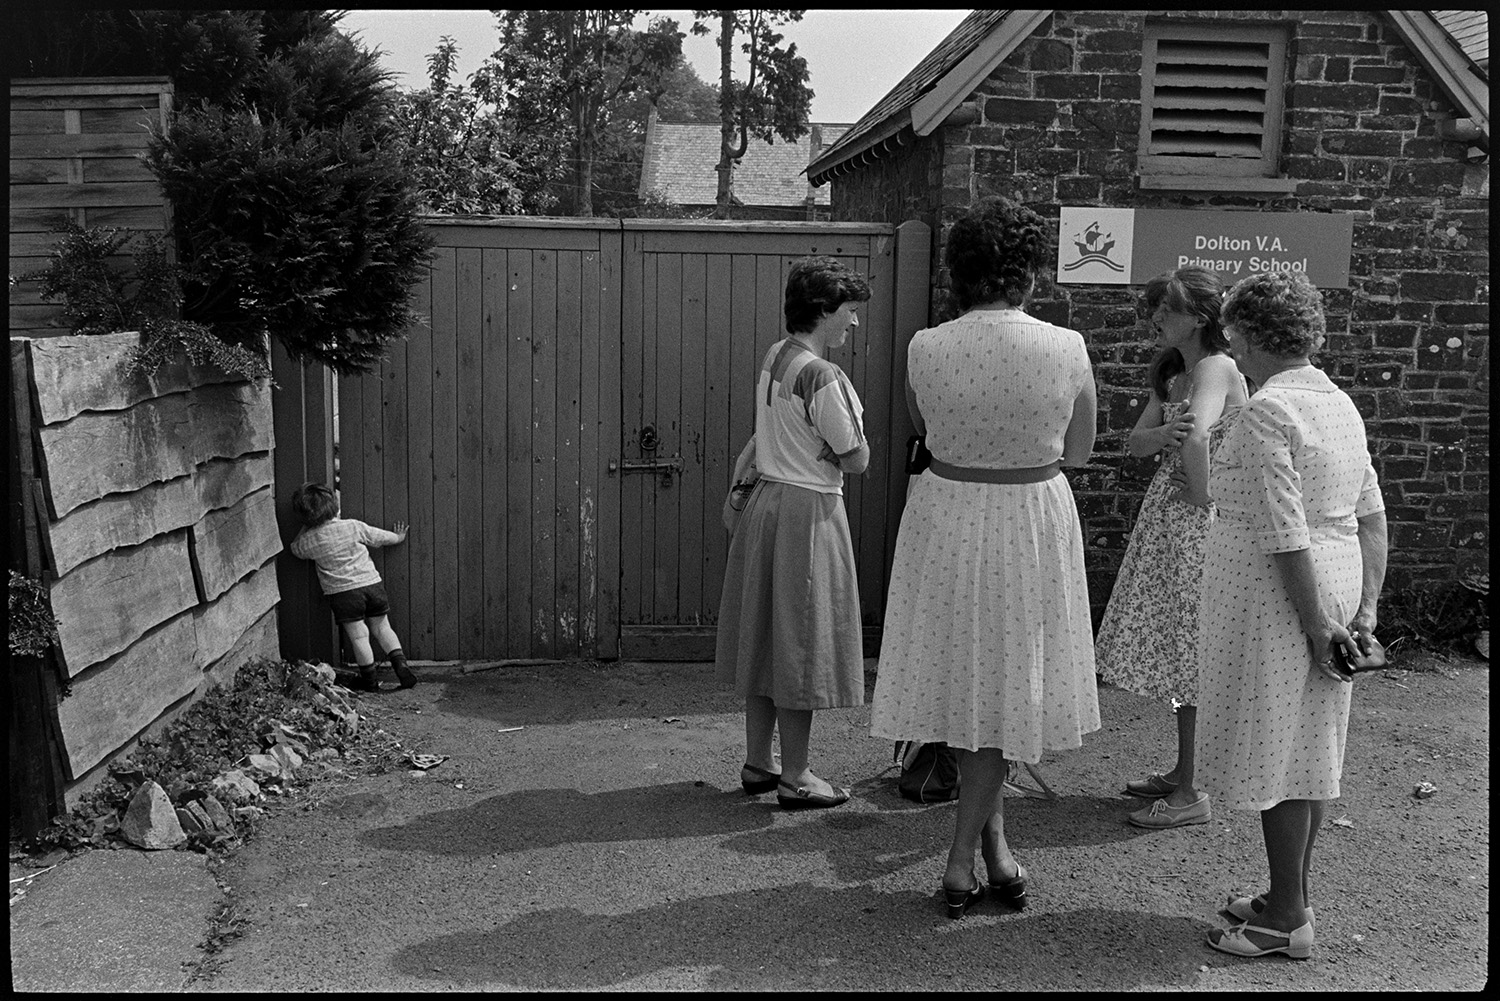 Women, mothers and children after school, in summer dresses. 
[Five women waiting for their children to finish school outside the gates of Dolton Primary School. They are wearing summer dresses. A young boy is peering through a gap by the side of the school gates in the background.]